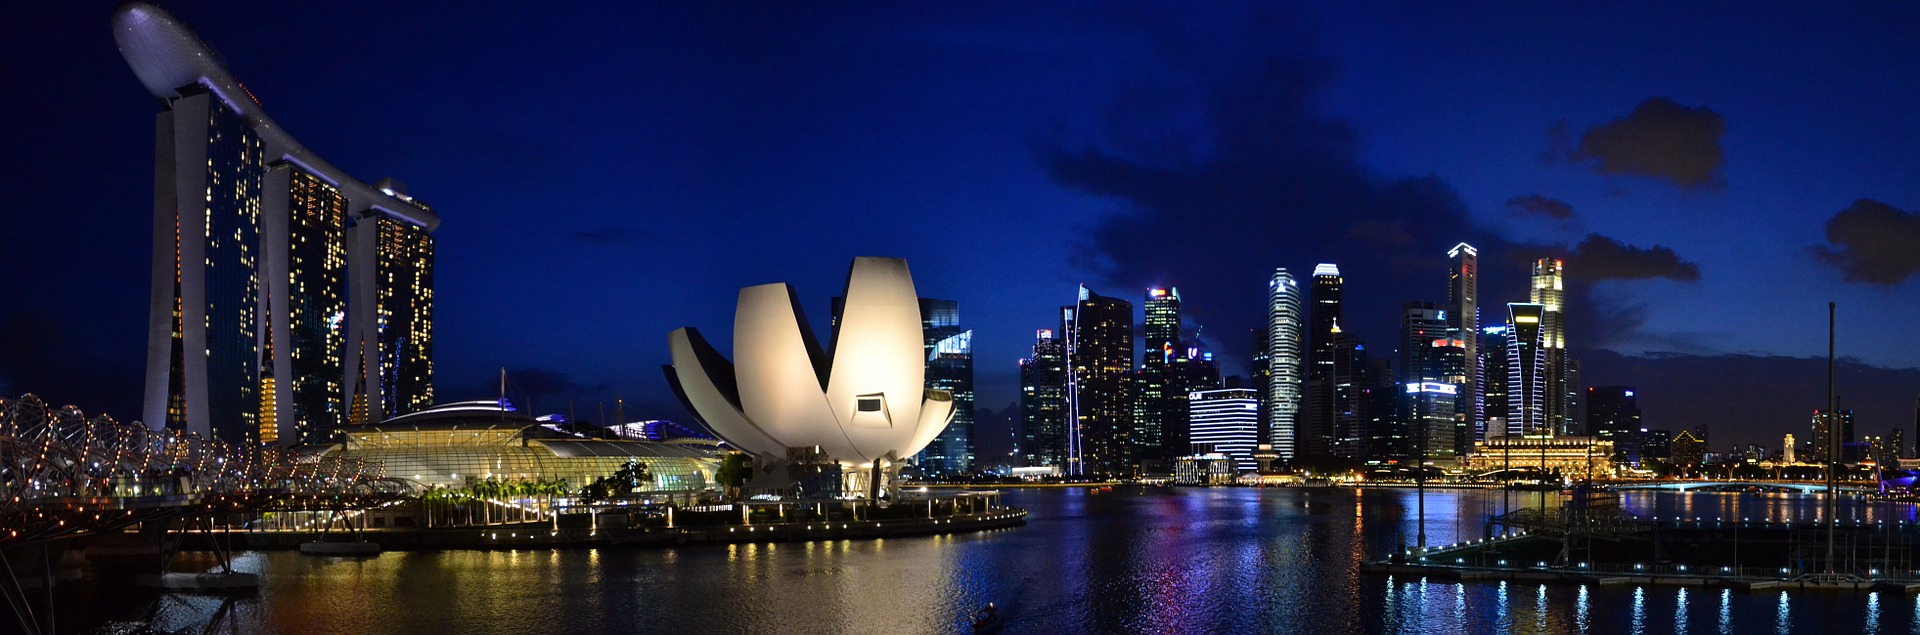 Philippines and Singapore: Two different worlds